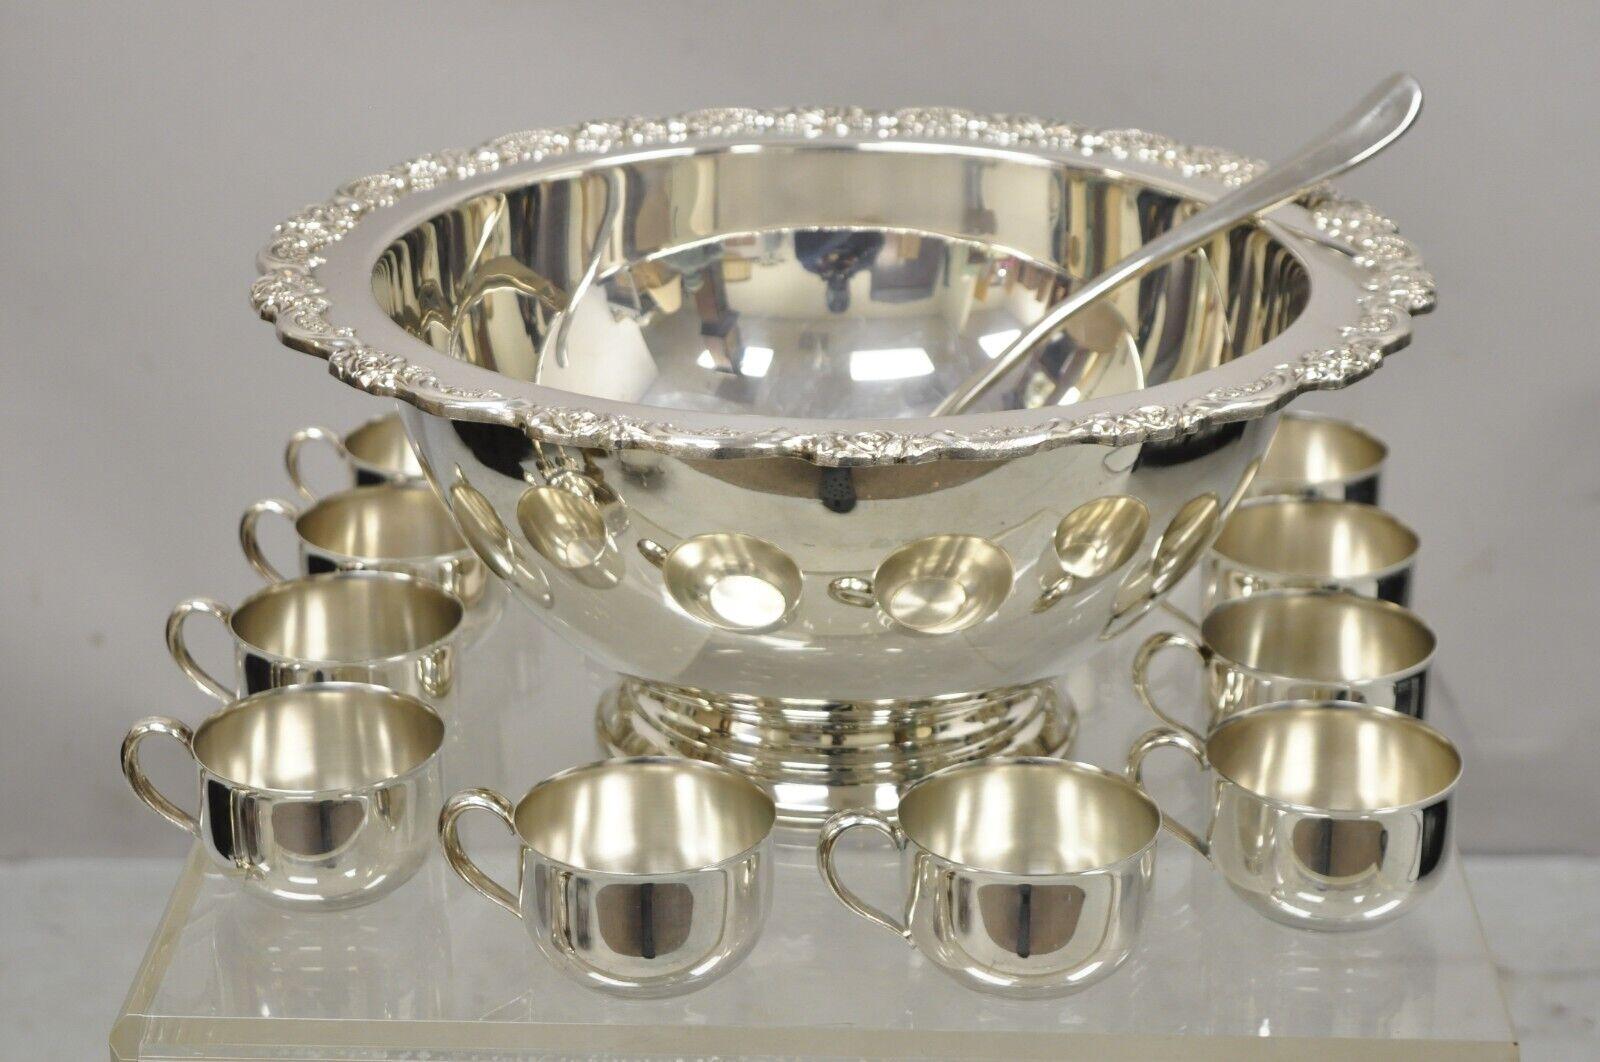 Victorian Oneida Silver Plated Punch Bowl Set with 12 Cups and Ladle